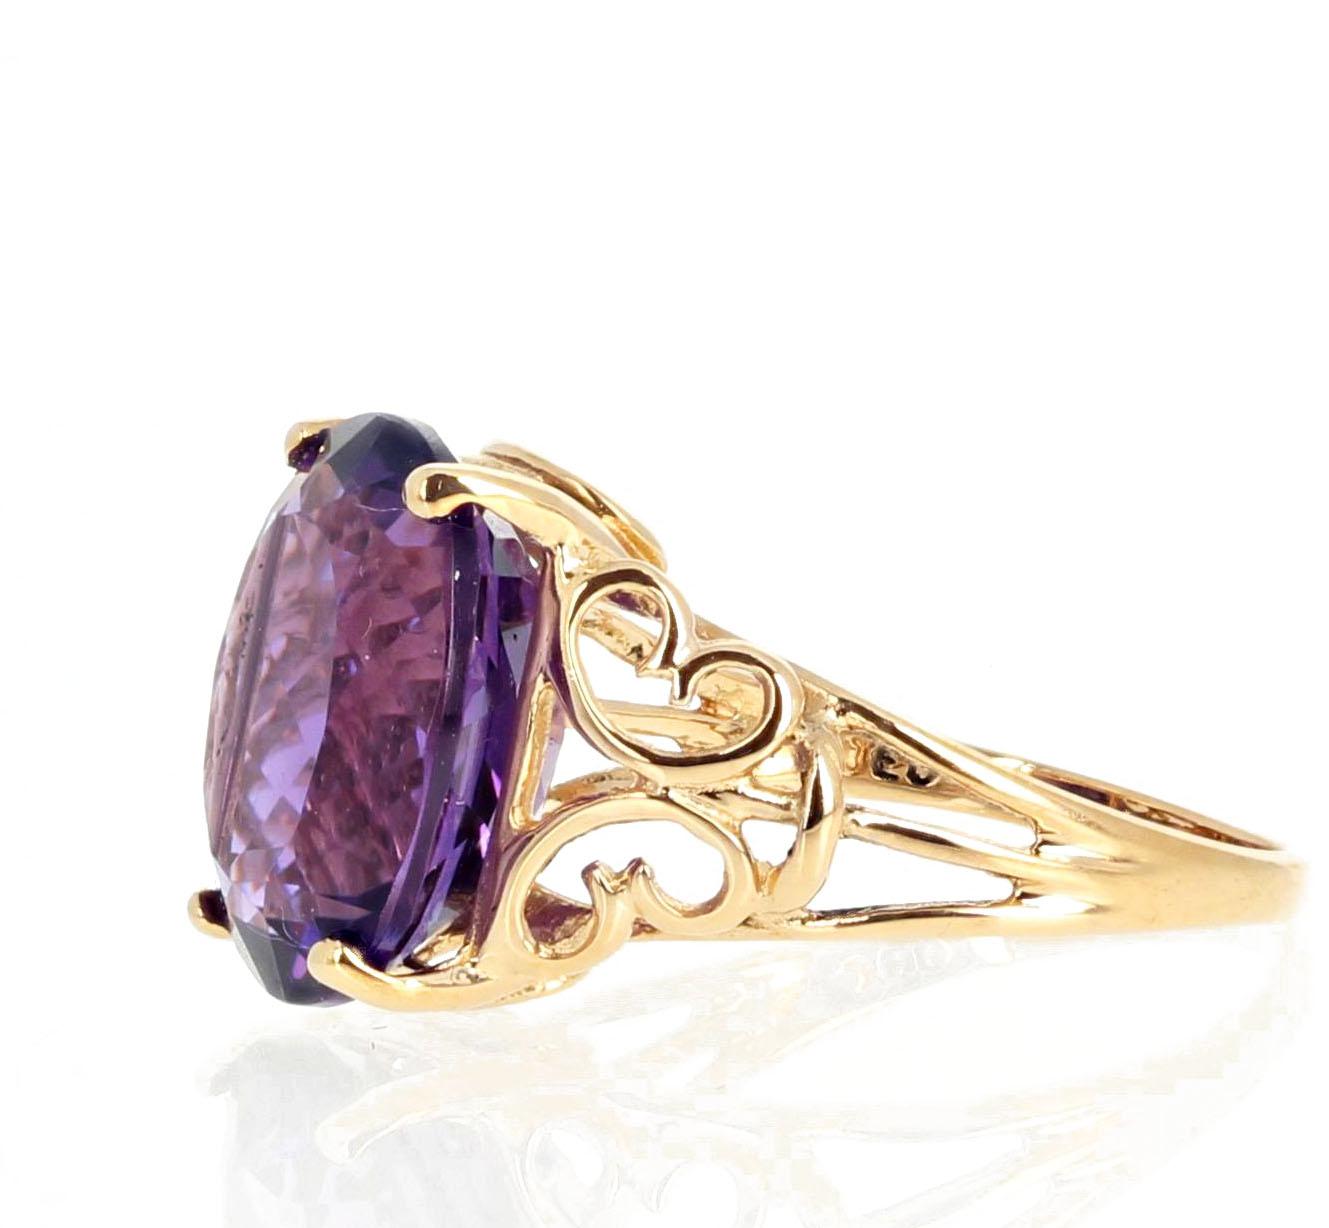 Oval Cut Gemjunky Debutante Collect Exquisite 7.5 Cts Sparkling Amethyst 14Kt Gold Ring